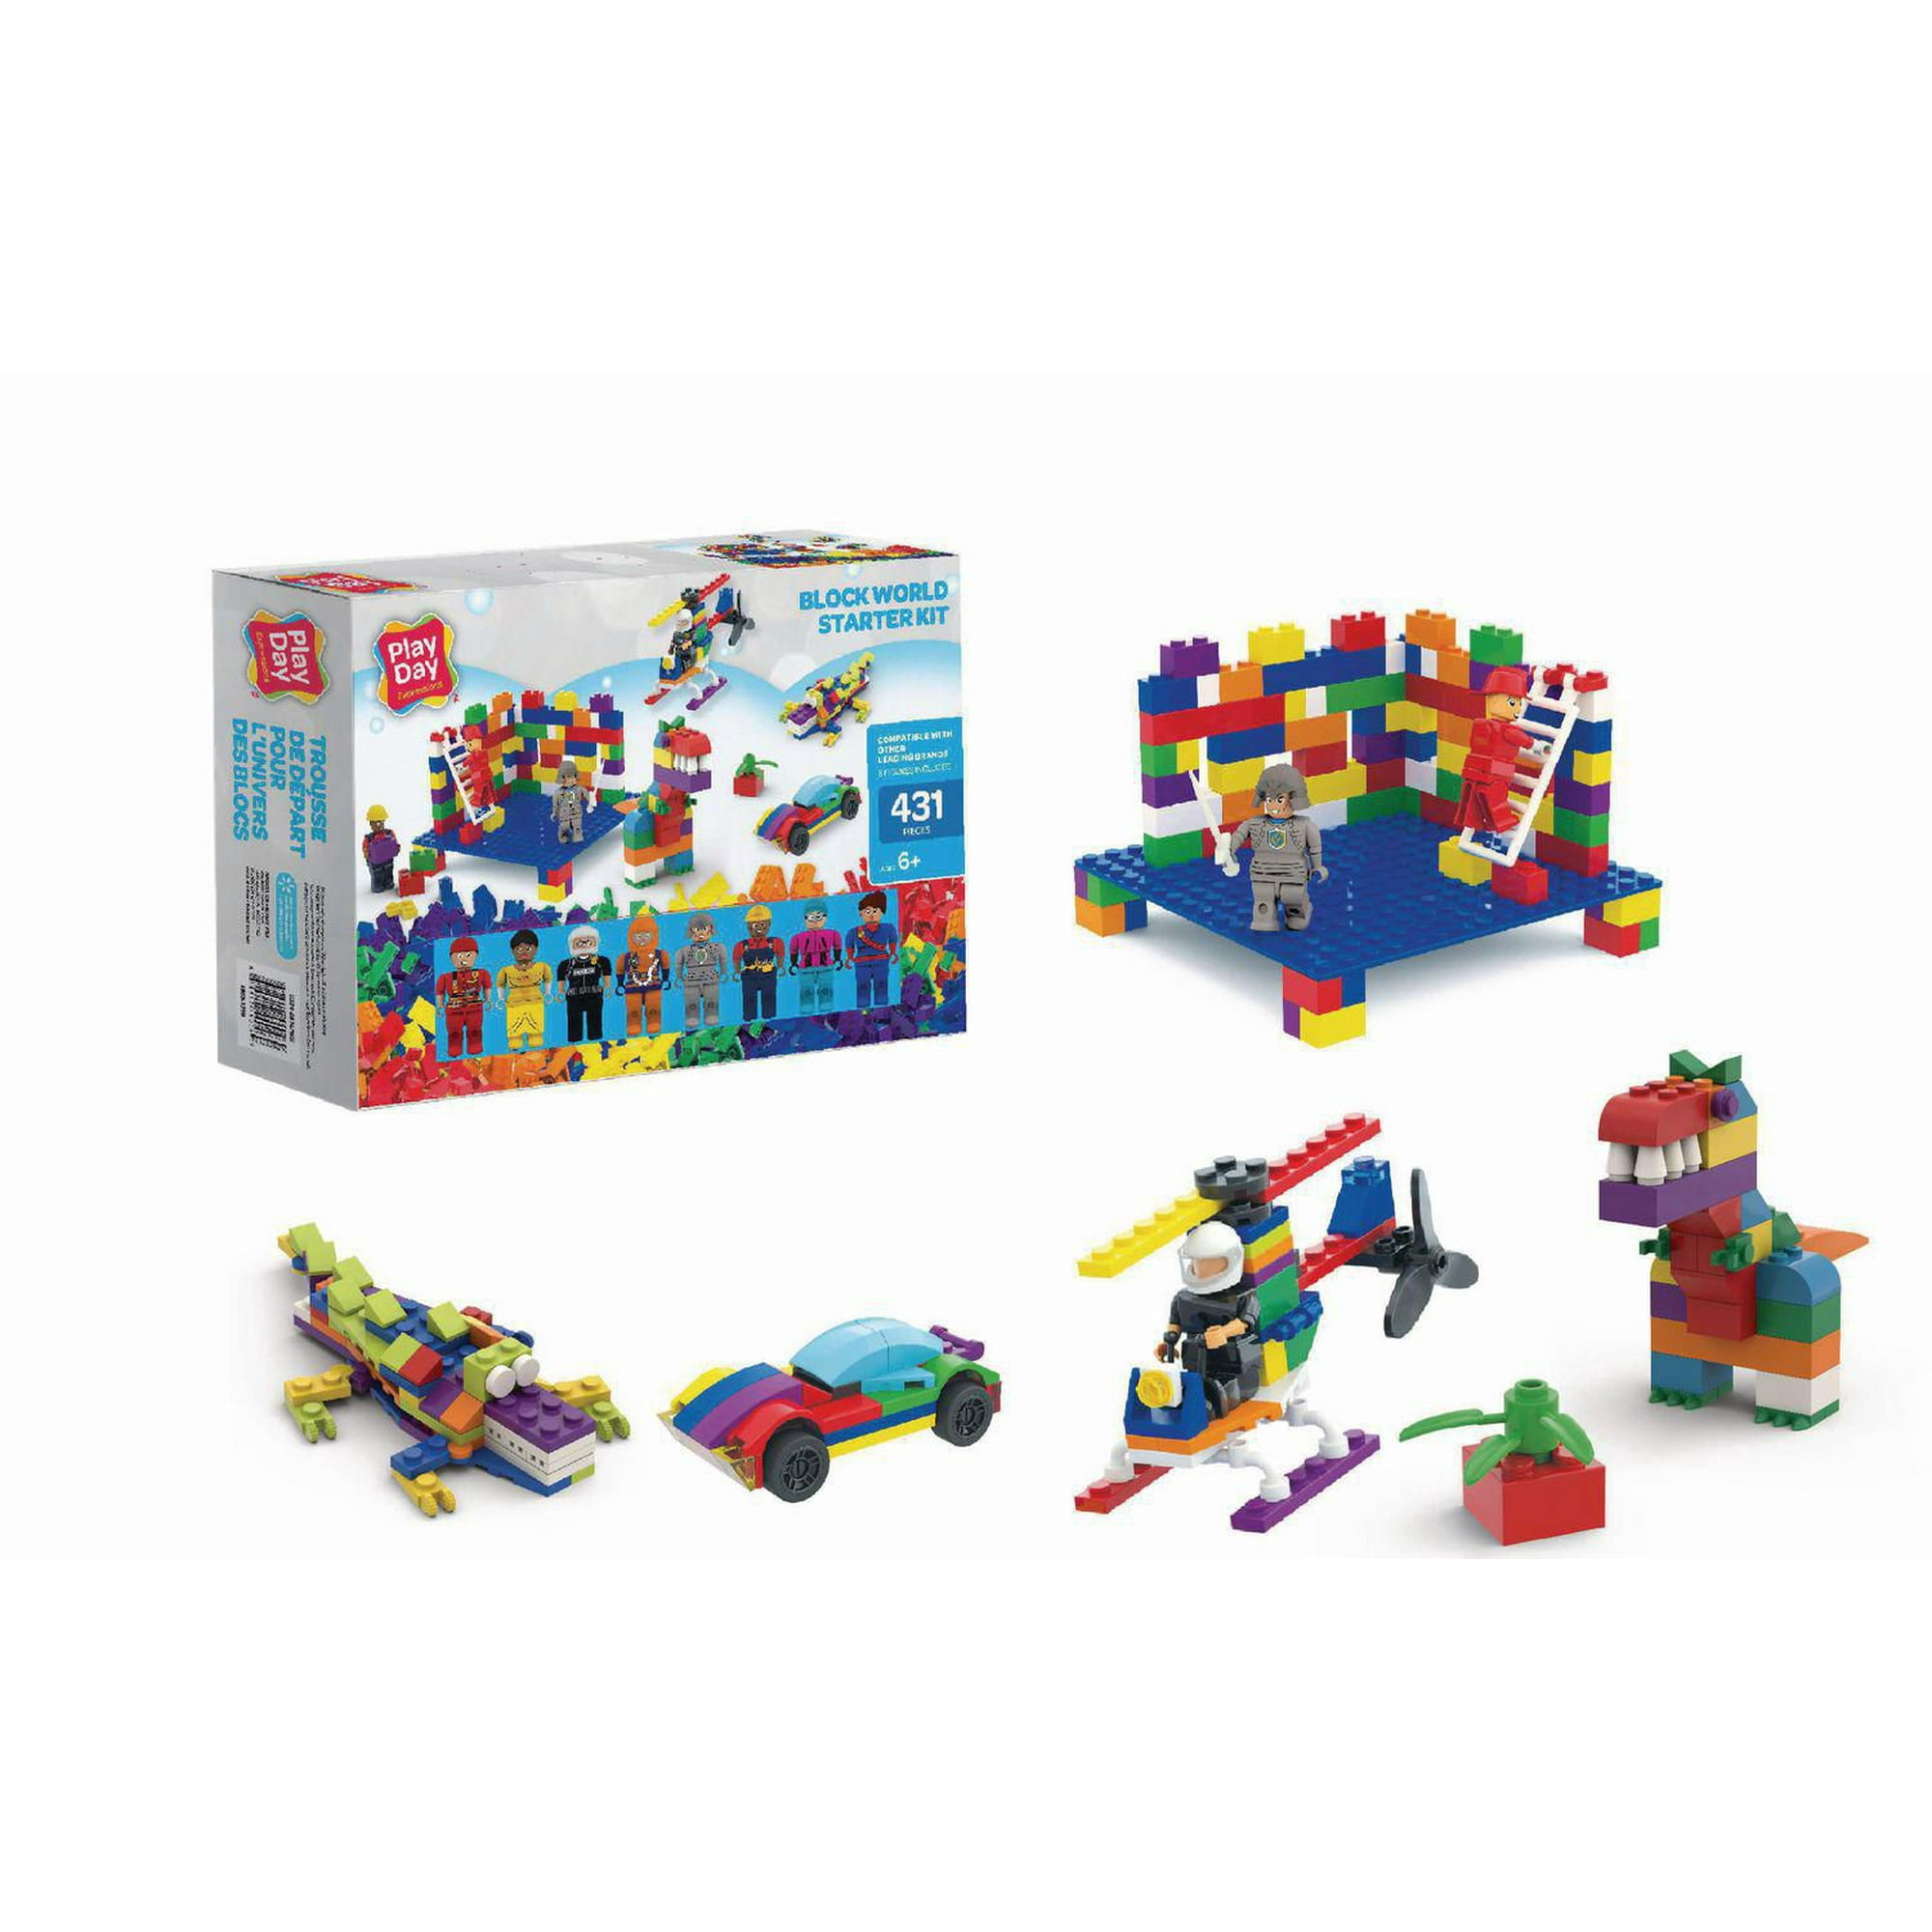 Play Day - Block World Starter Kit 431 Piece, Compatible with